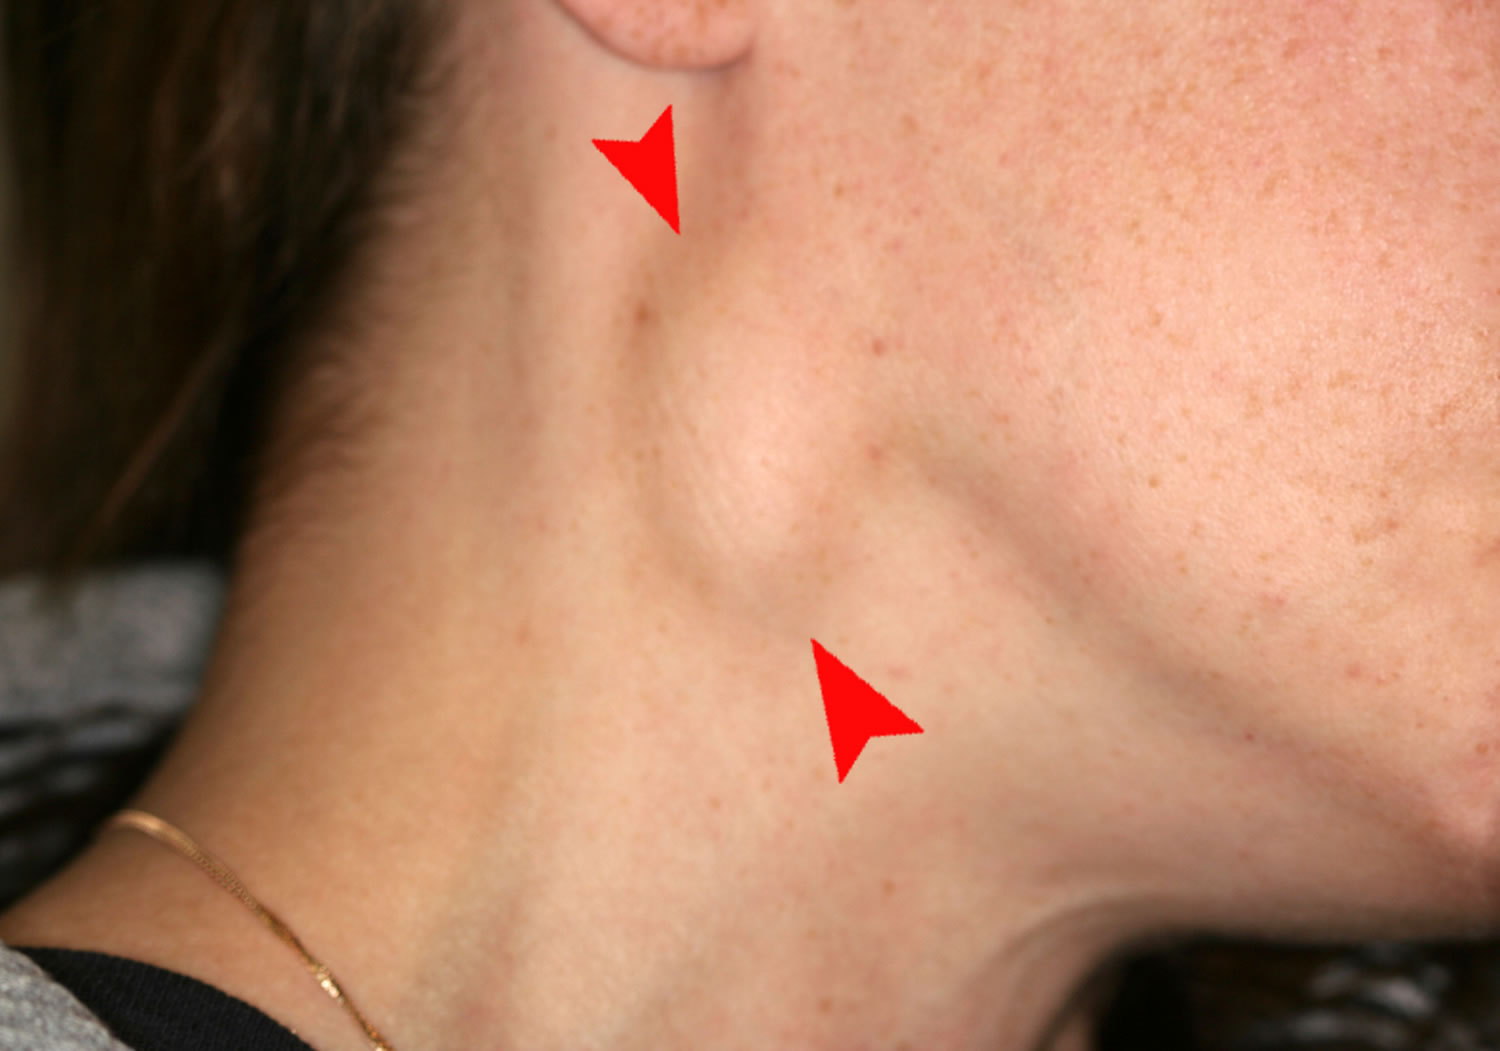 shotty lymph nodes after infection